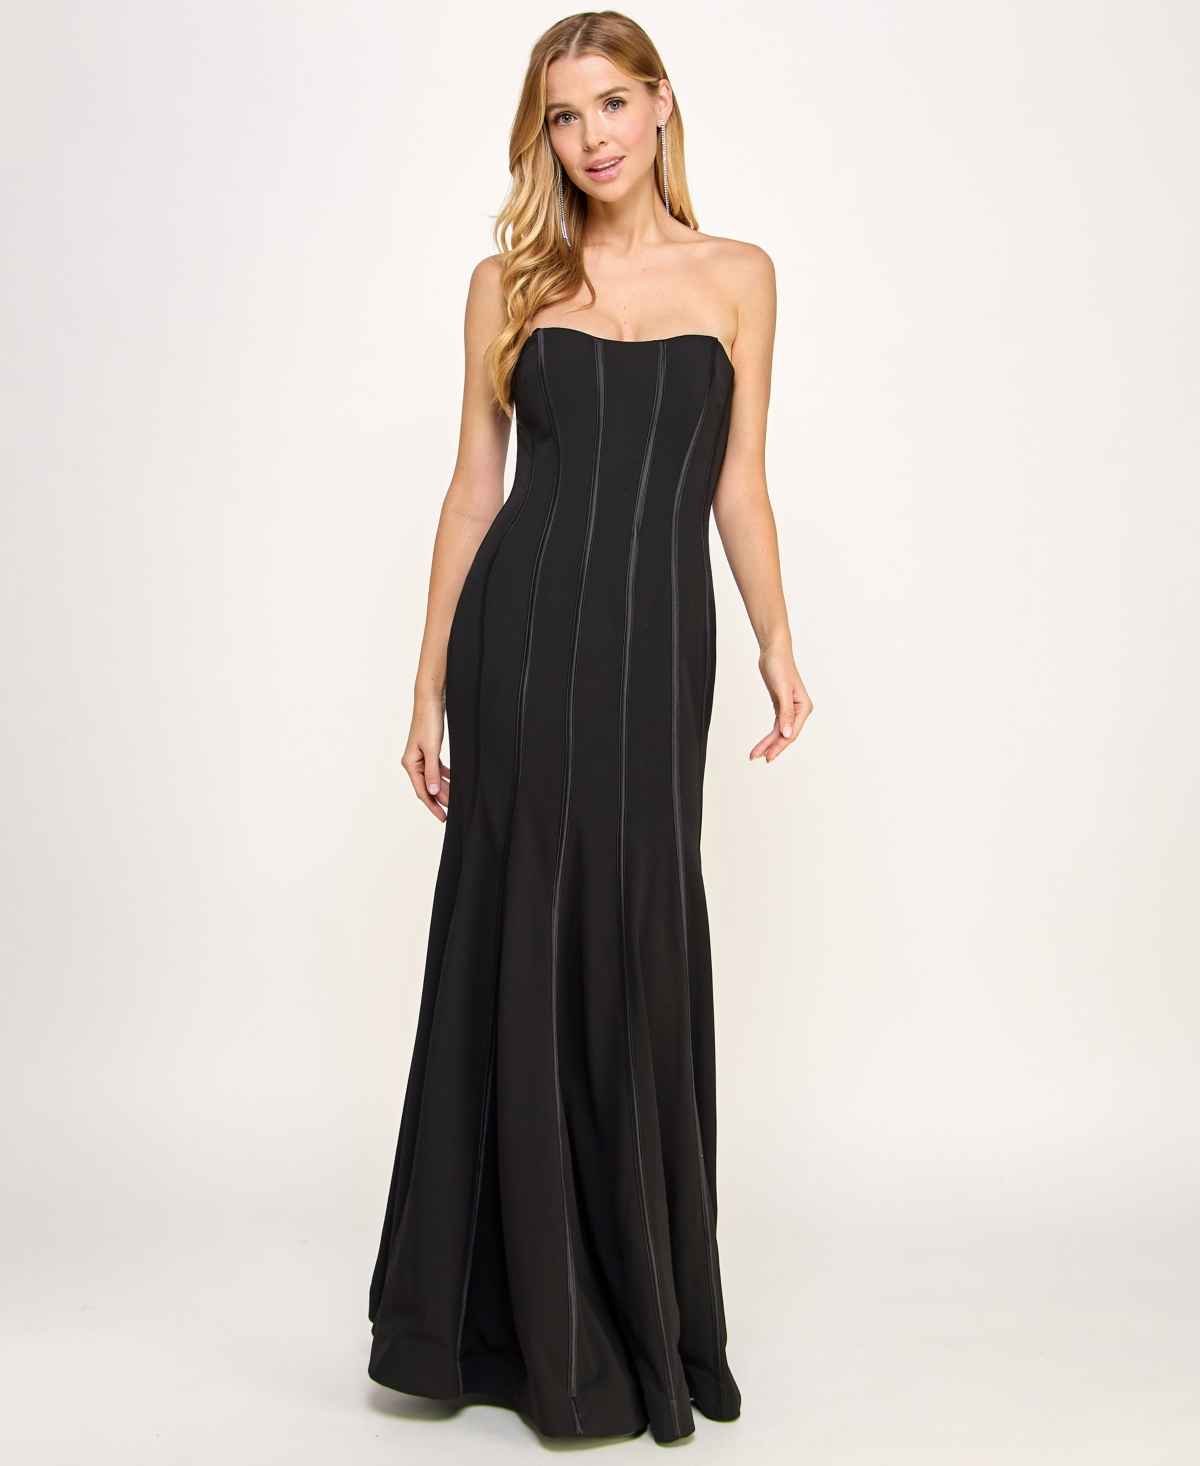 Juniors' Corset Strapless Gown, Created for Macy's - Black